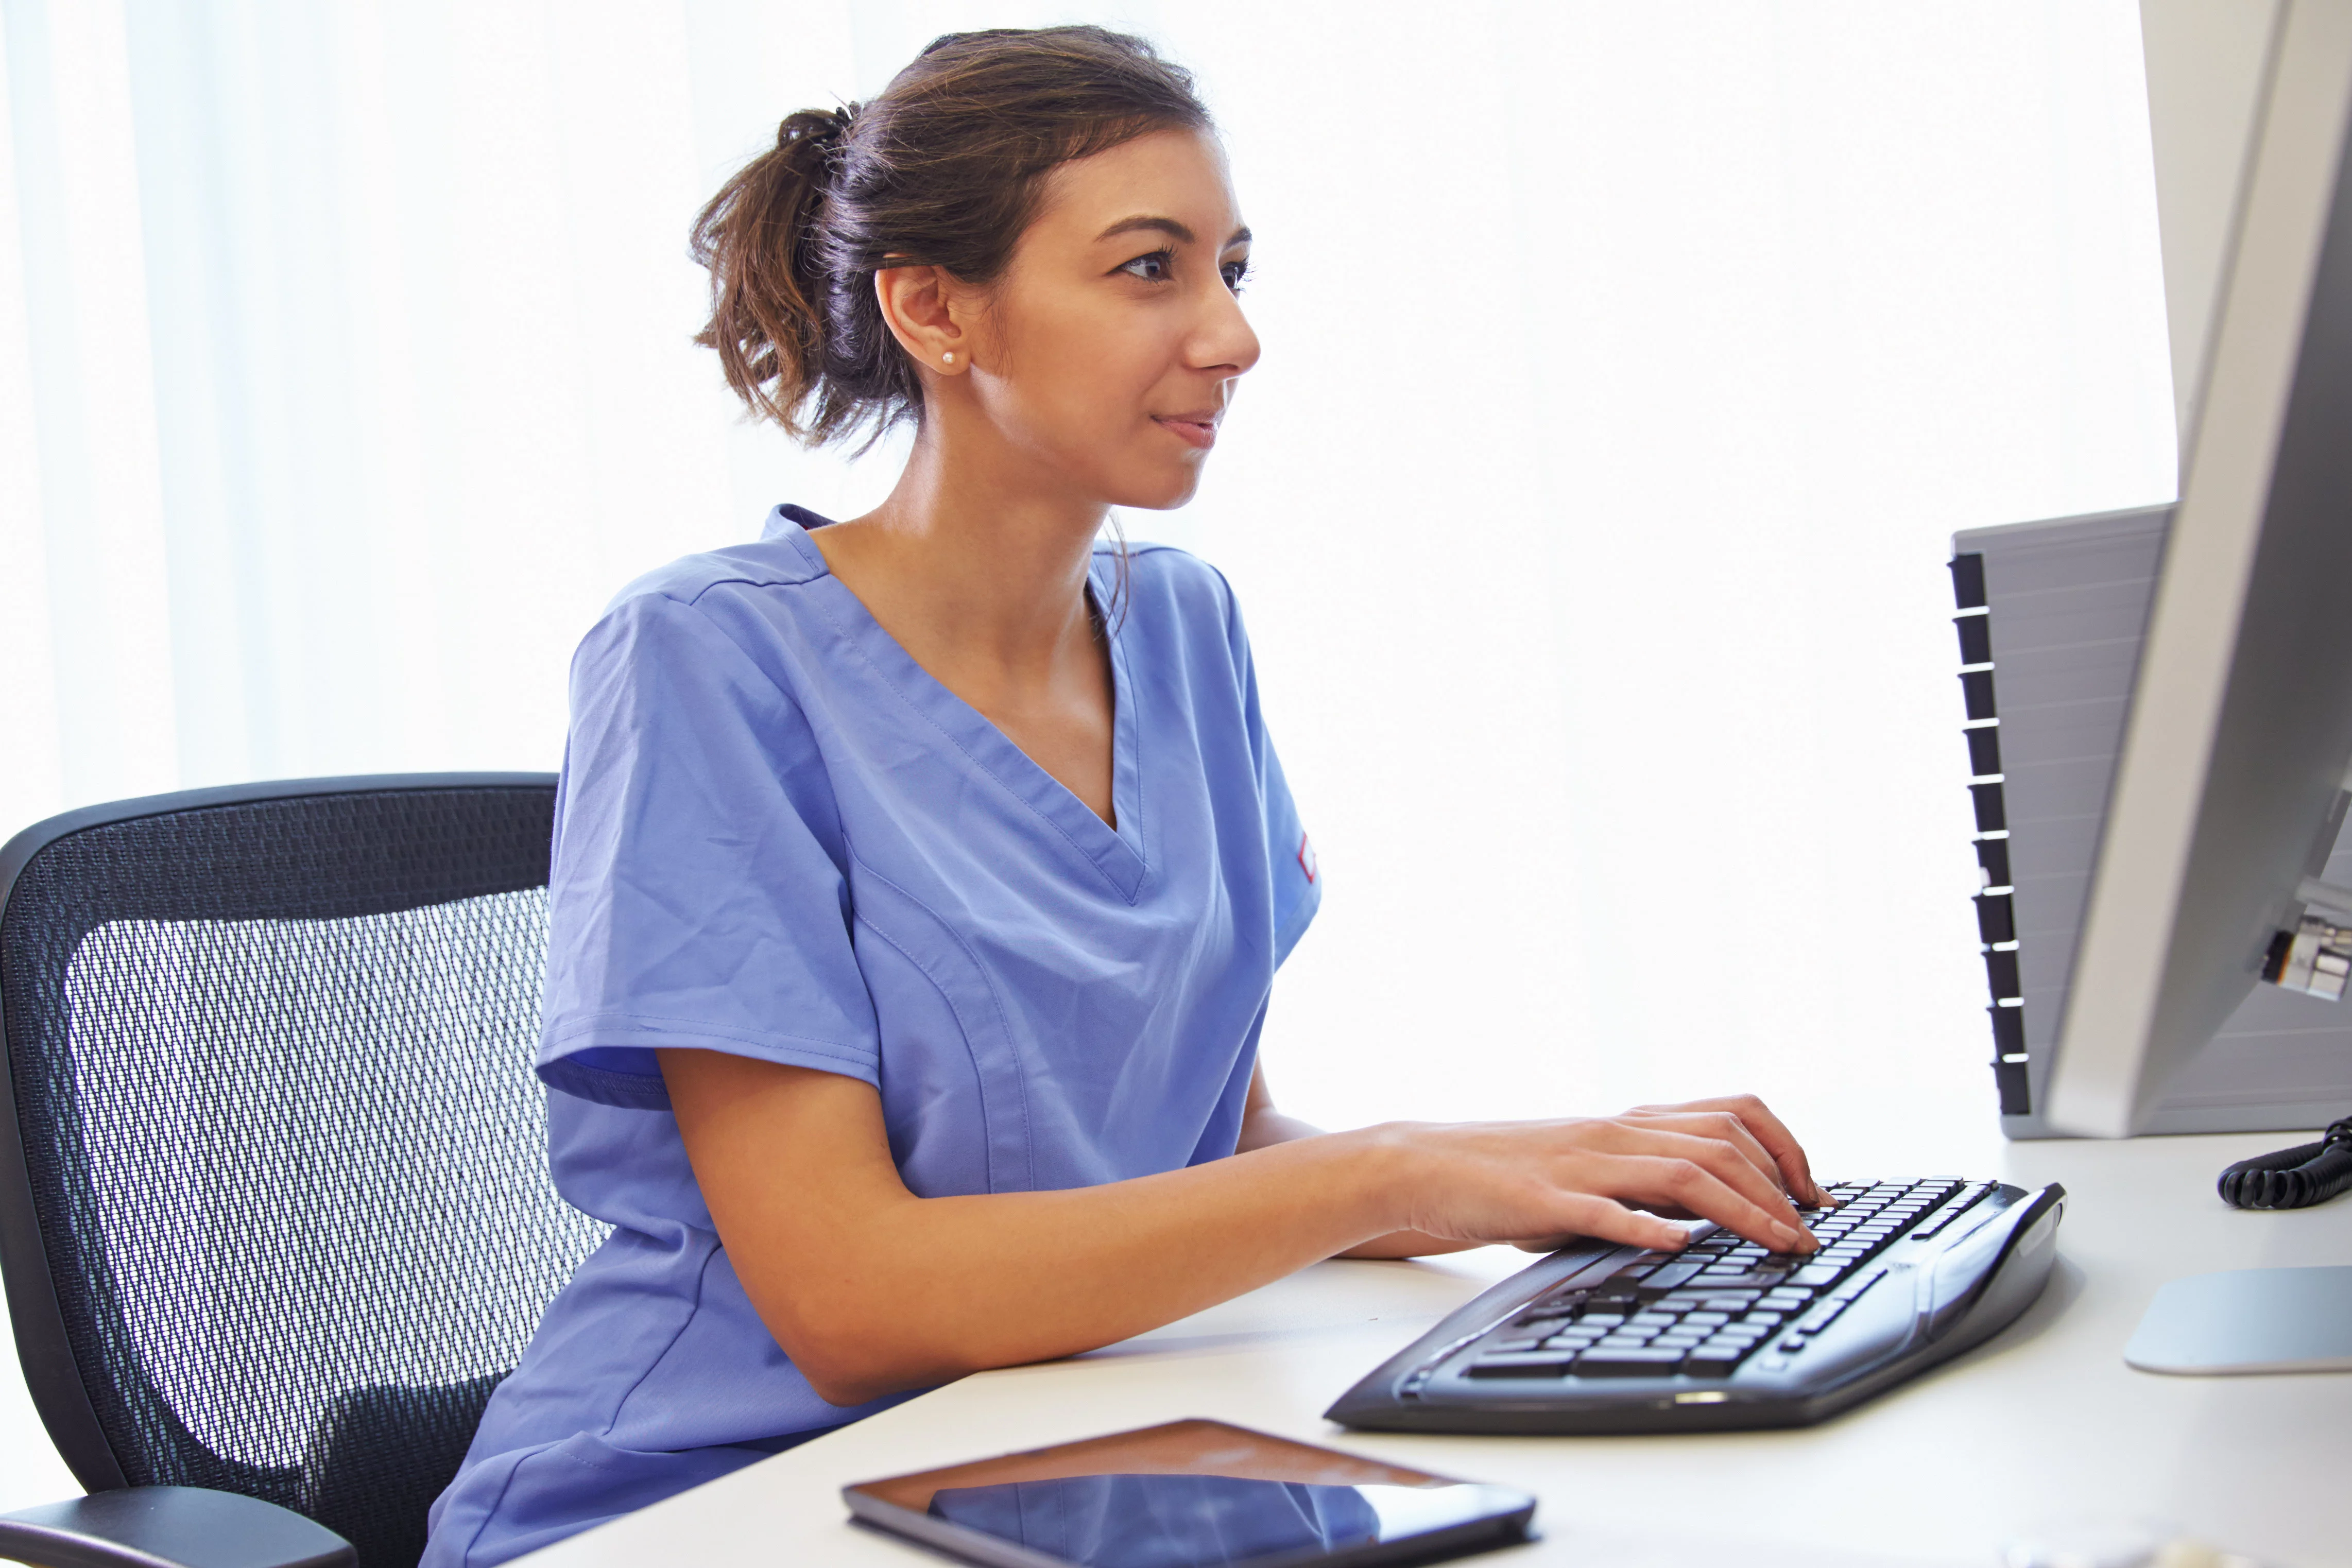 Female Nurse In Office Working At Computer